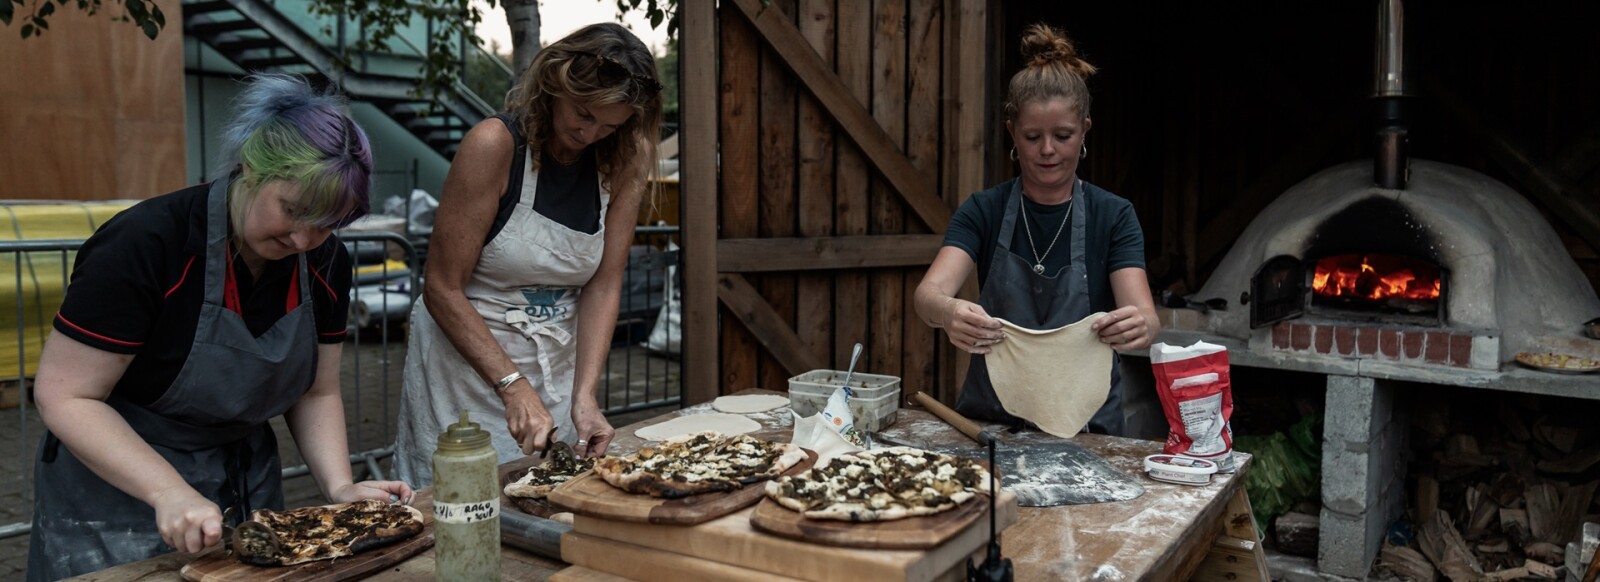 Three people making pizzas in the GRAFT garden pizza oven.